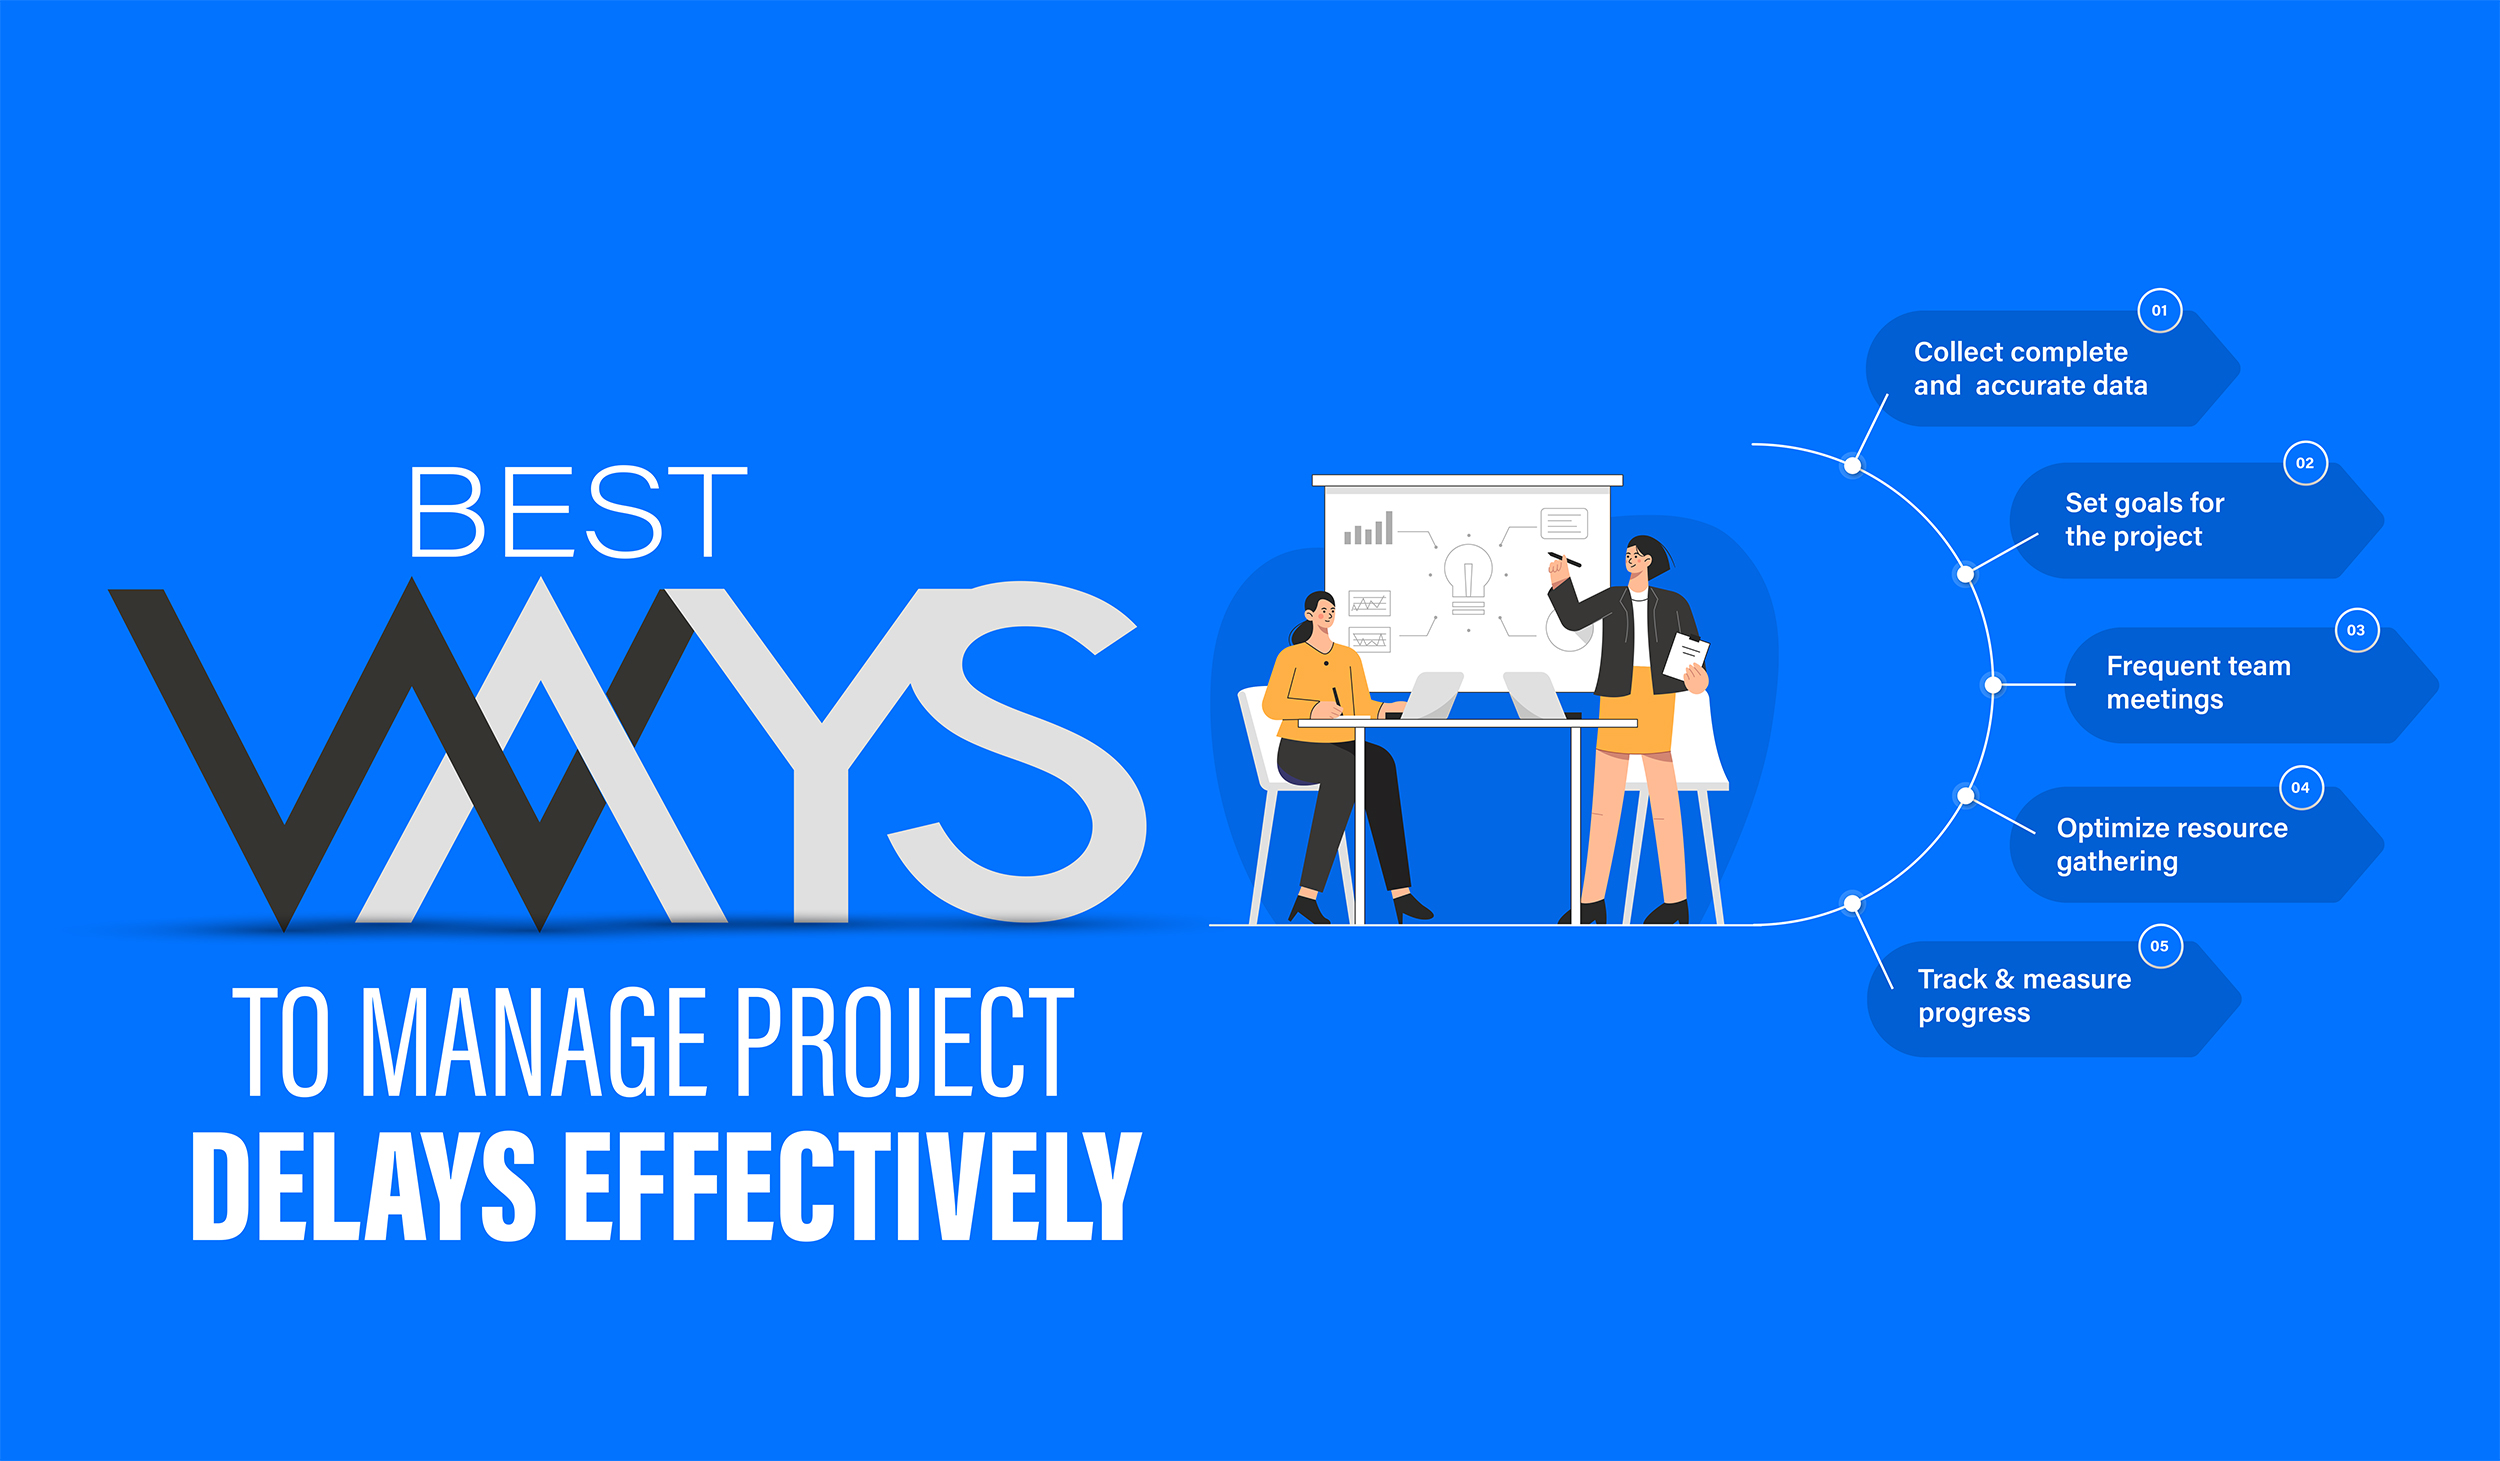 Best ways to manage project delays effectively 4